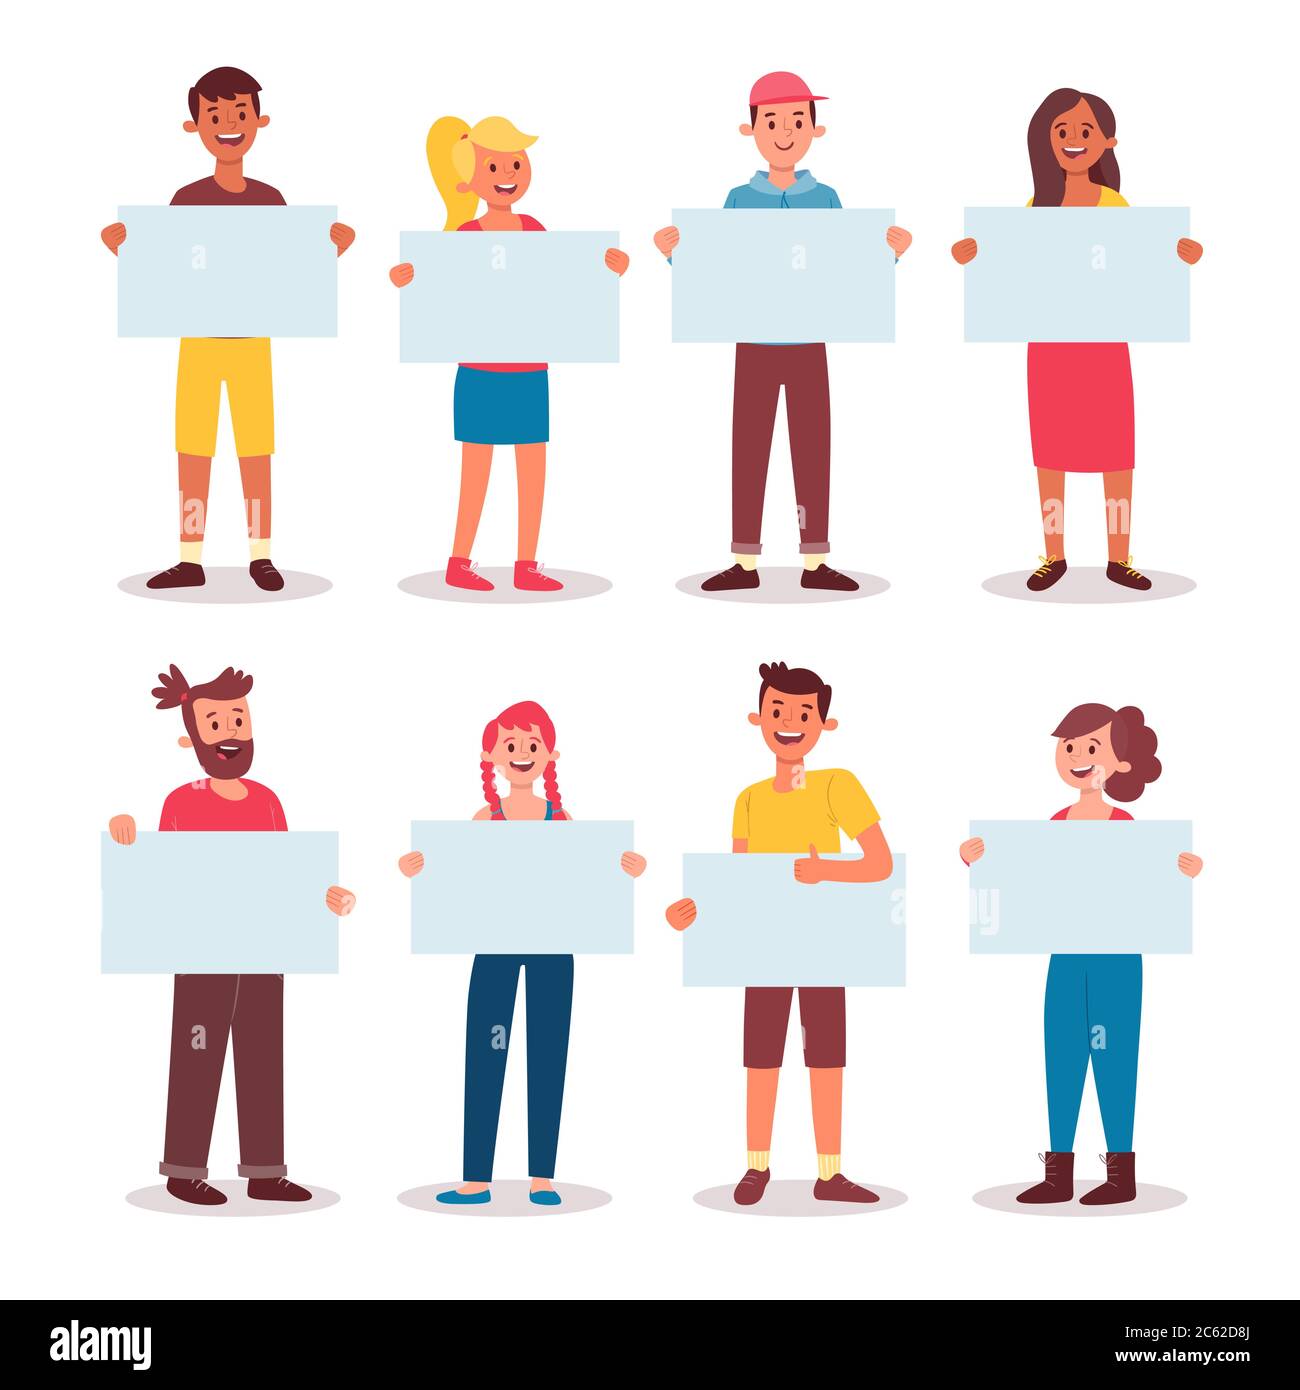 Collection of young people holding blank placards. Bundle of male and female full body cartoon character. Colorful vector illustration in flat style. Stock Vector